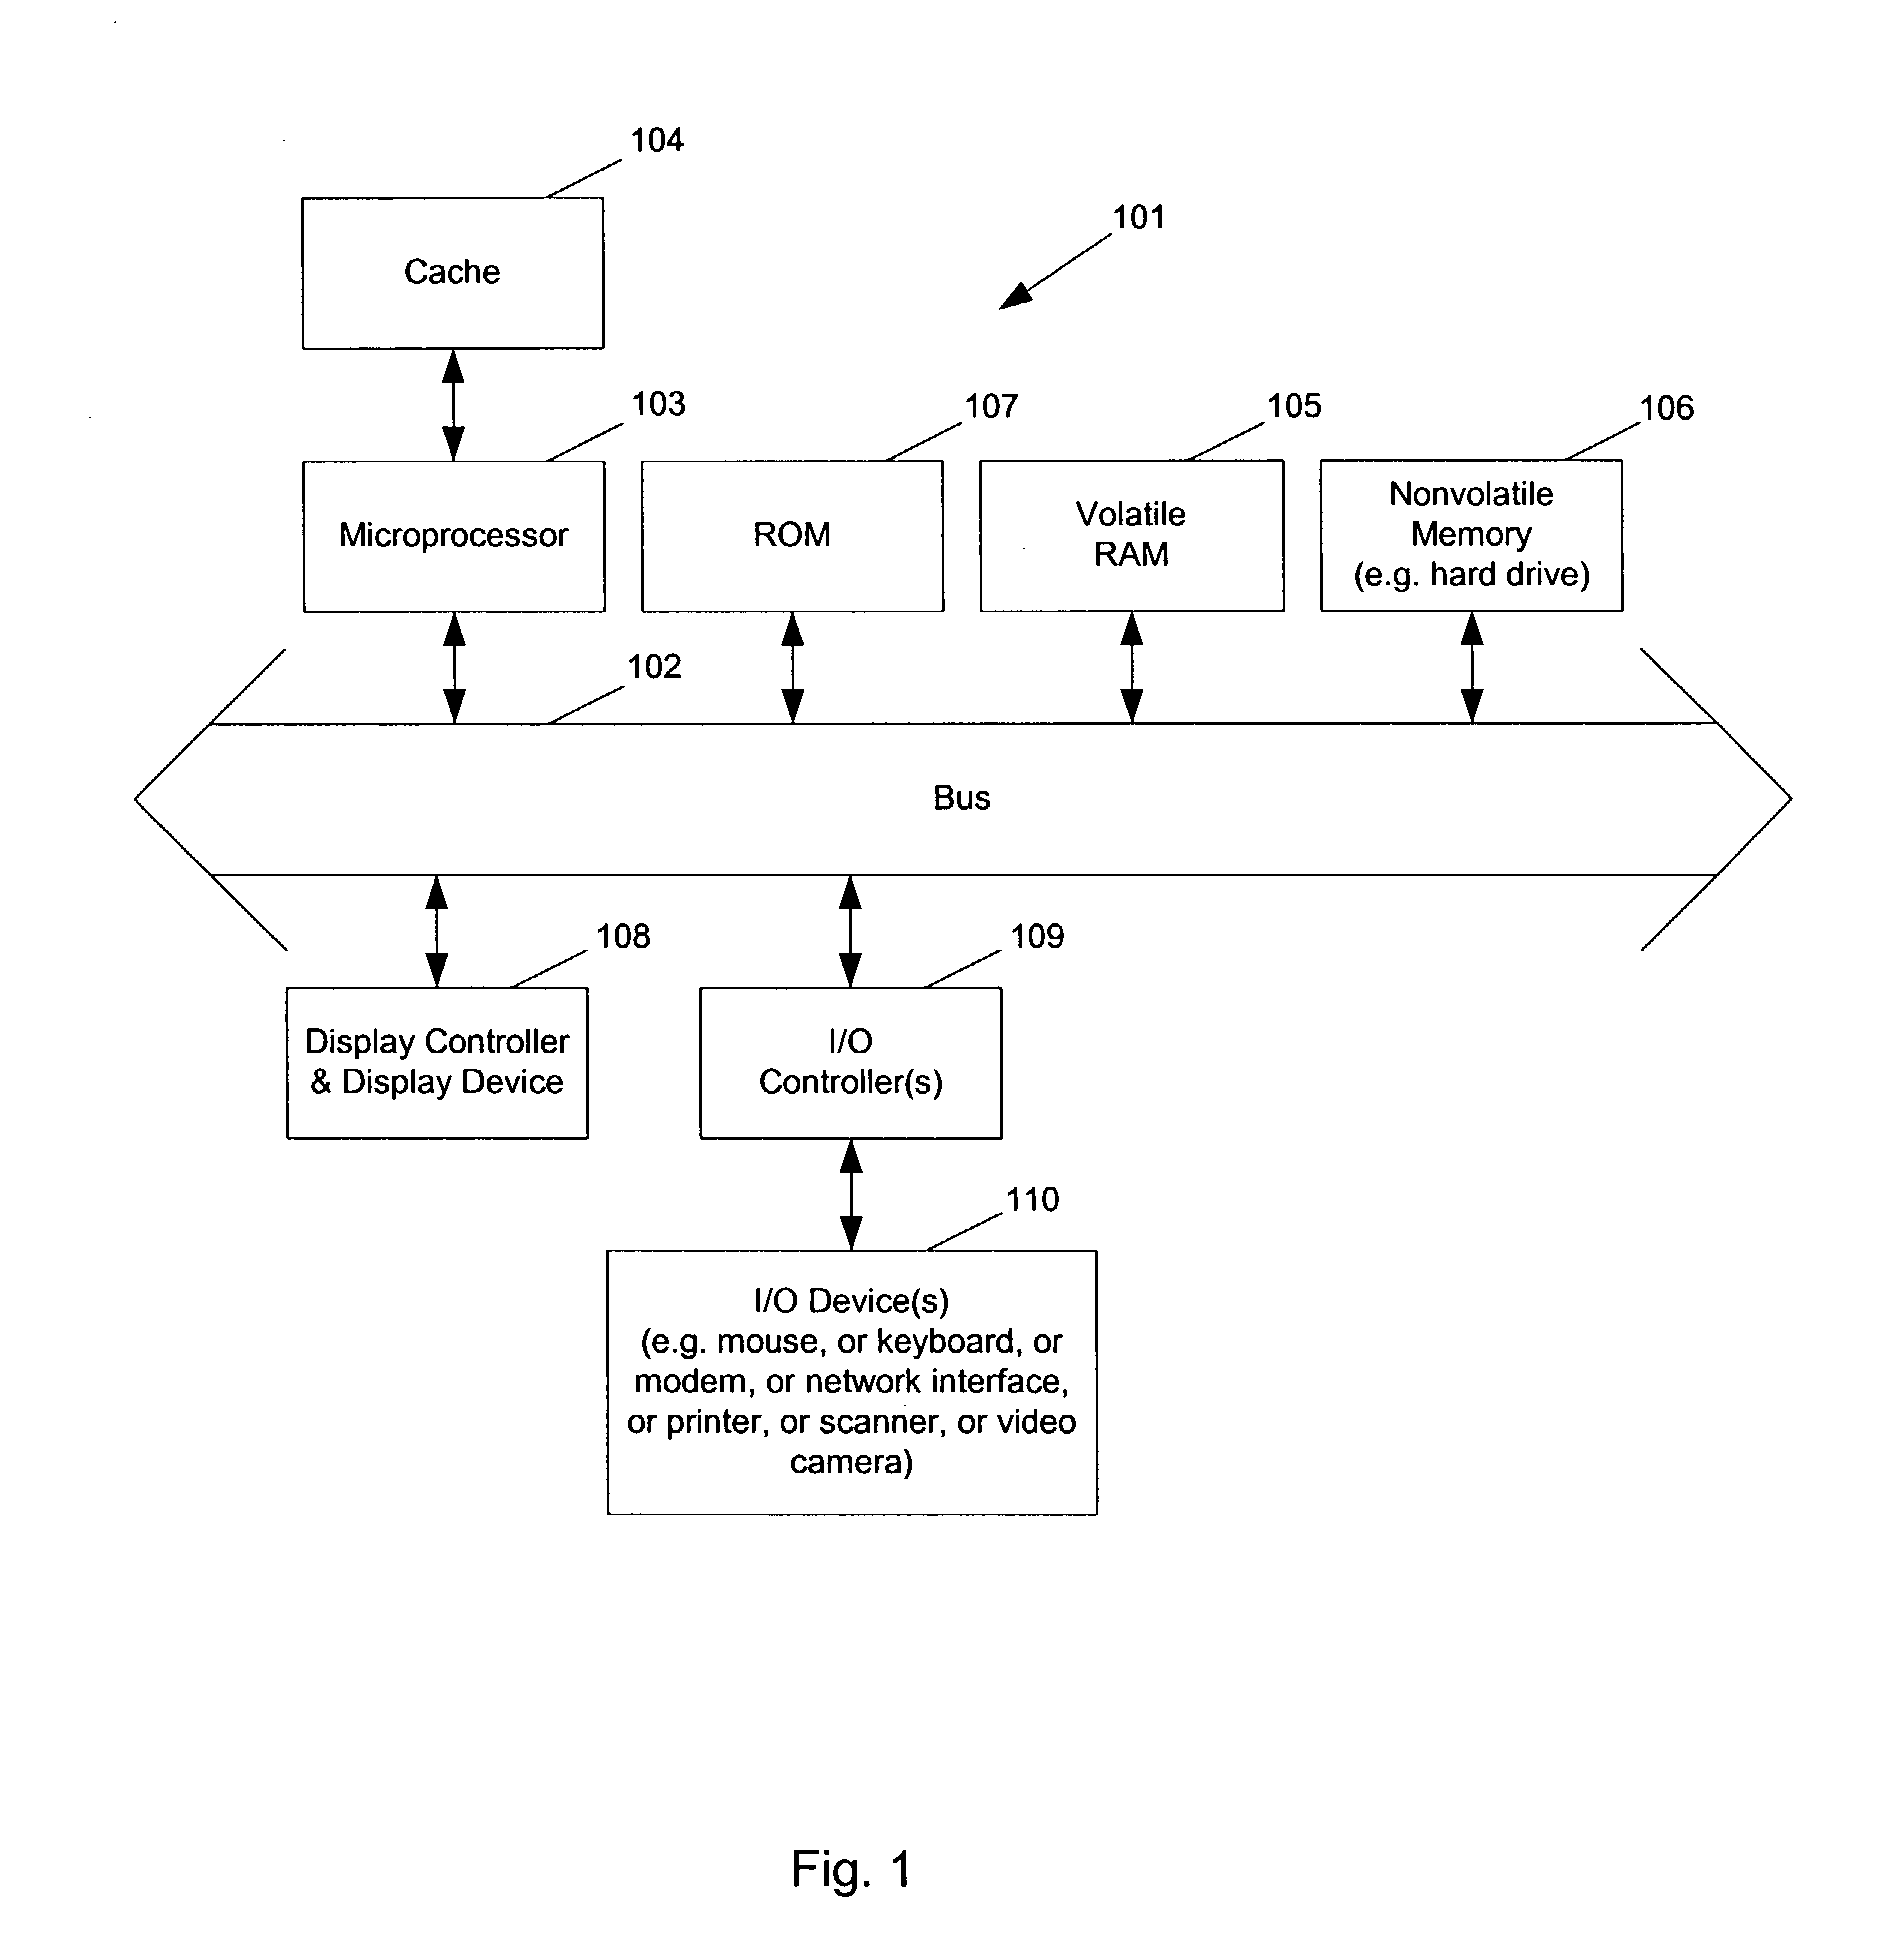 Method and apparatus to accelerate scrolling for buffered windows